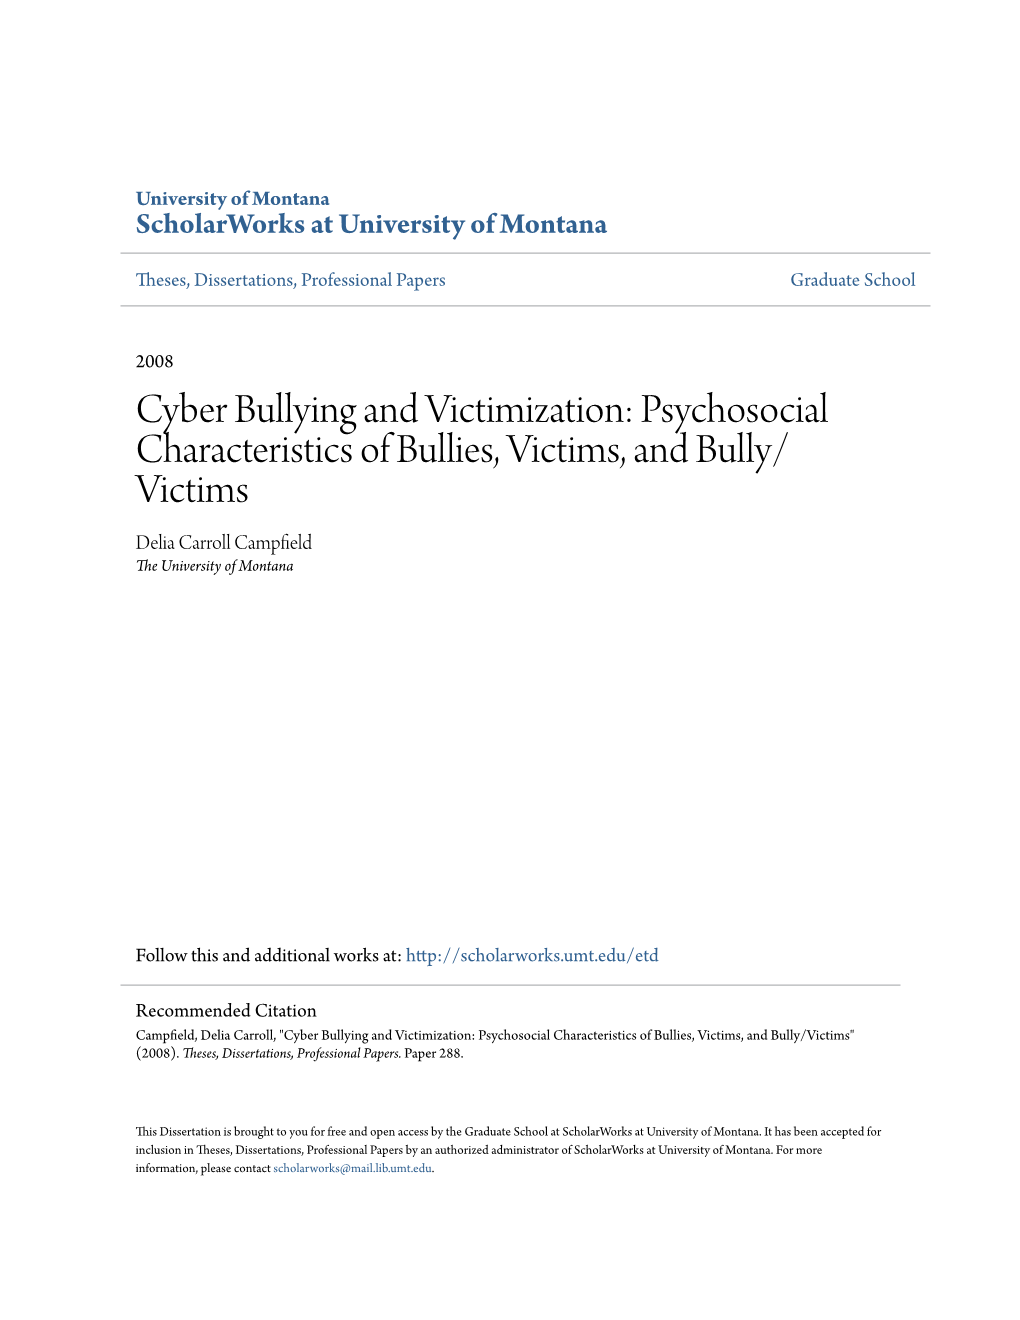 Cyber Bullying and Victimization: Psychosocial Characteristics of Bullies, Victims, and Bully/ Victims Delia Carroll Campfield the University of Montana